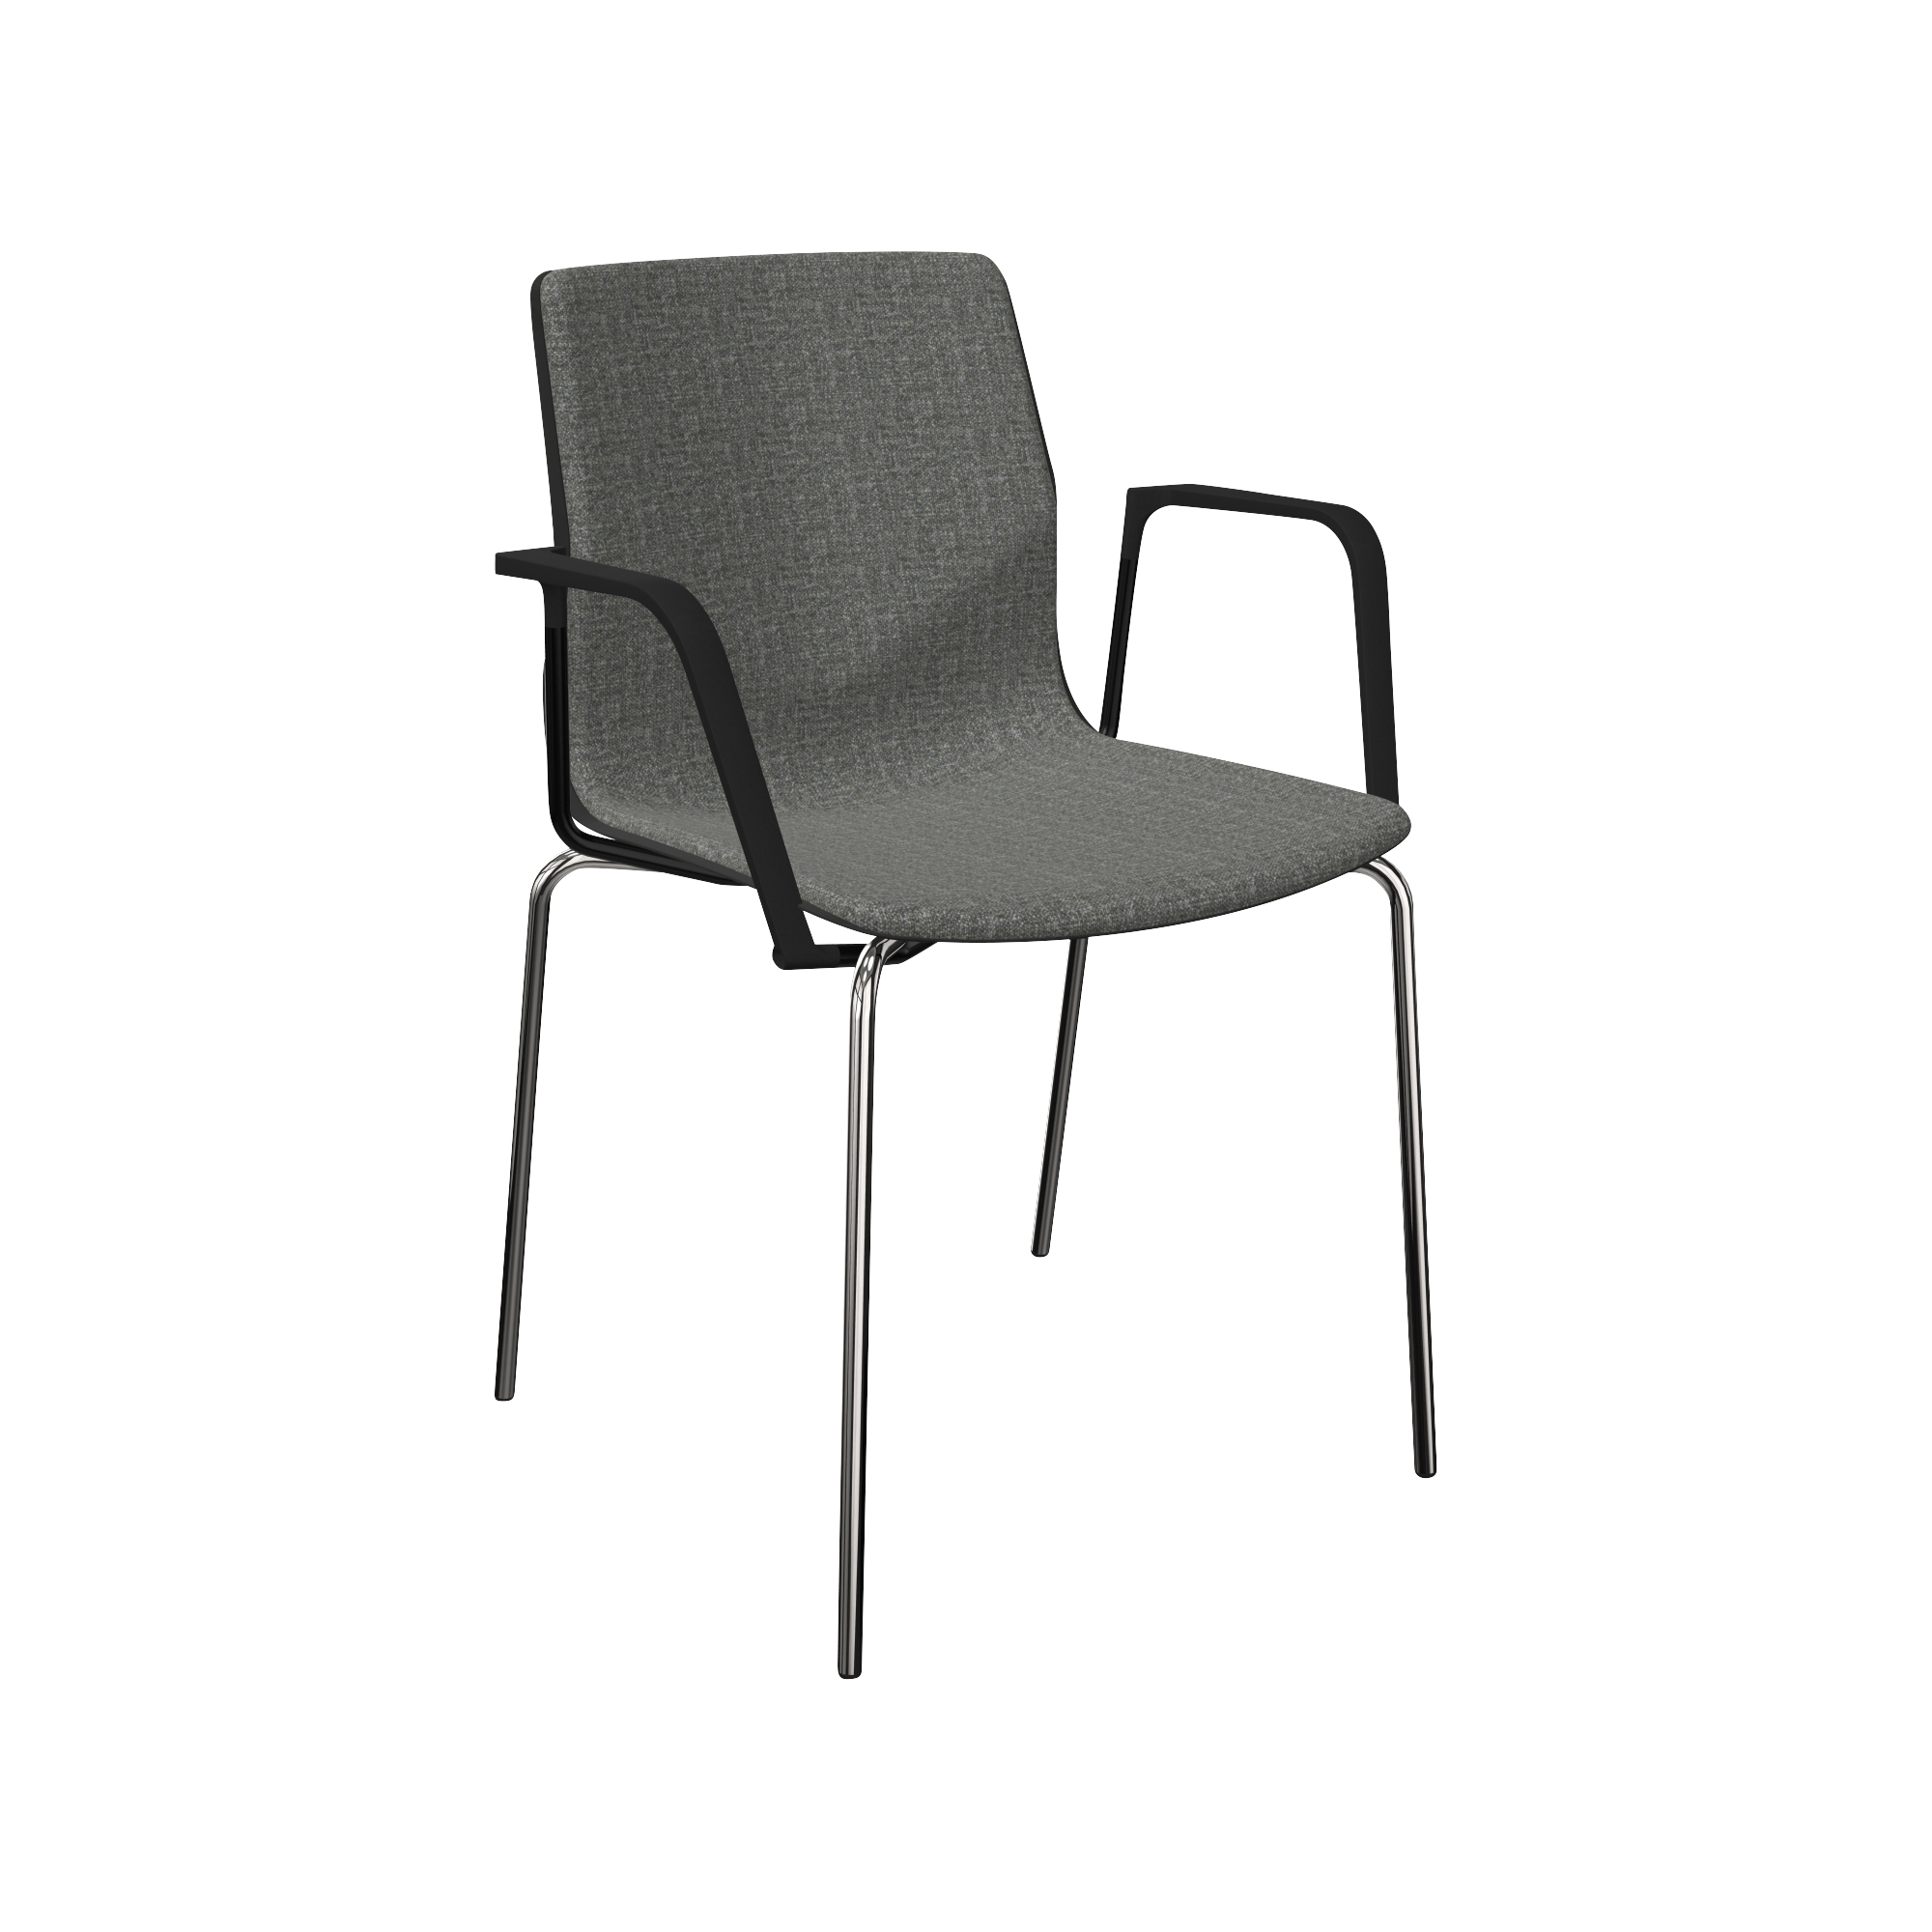 A grey chair with a black frame